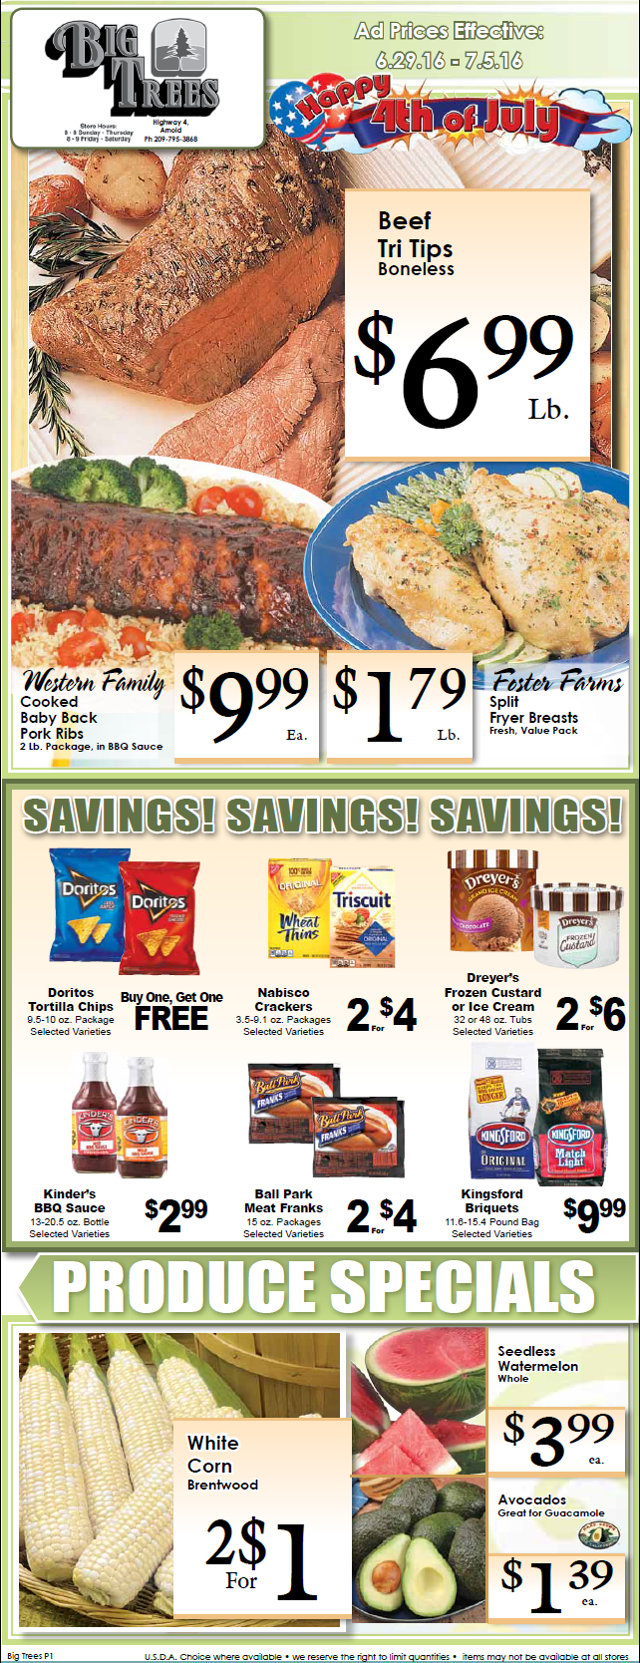 Big Trees Market Weekly Ad & Specials Through July 5th